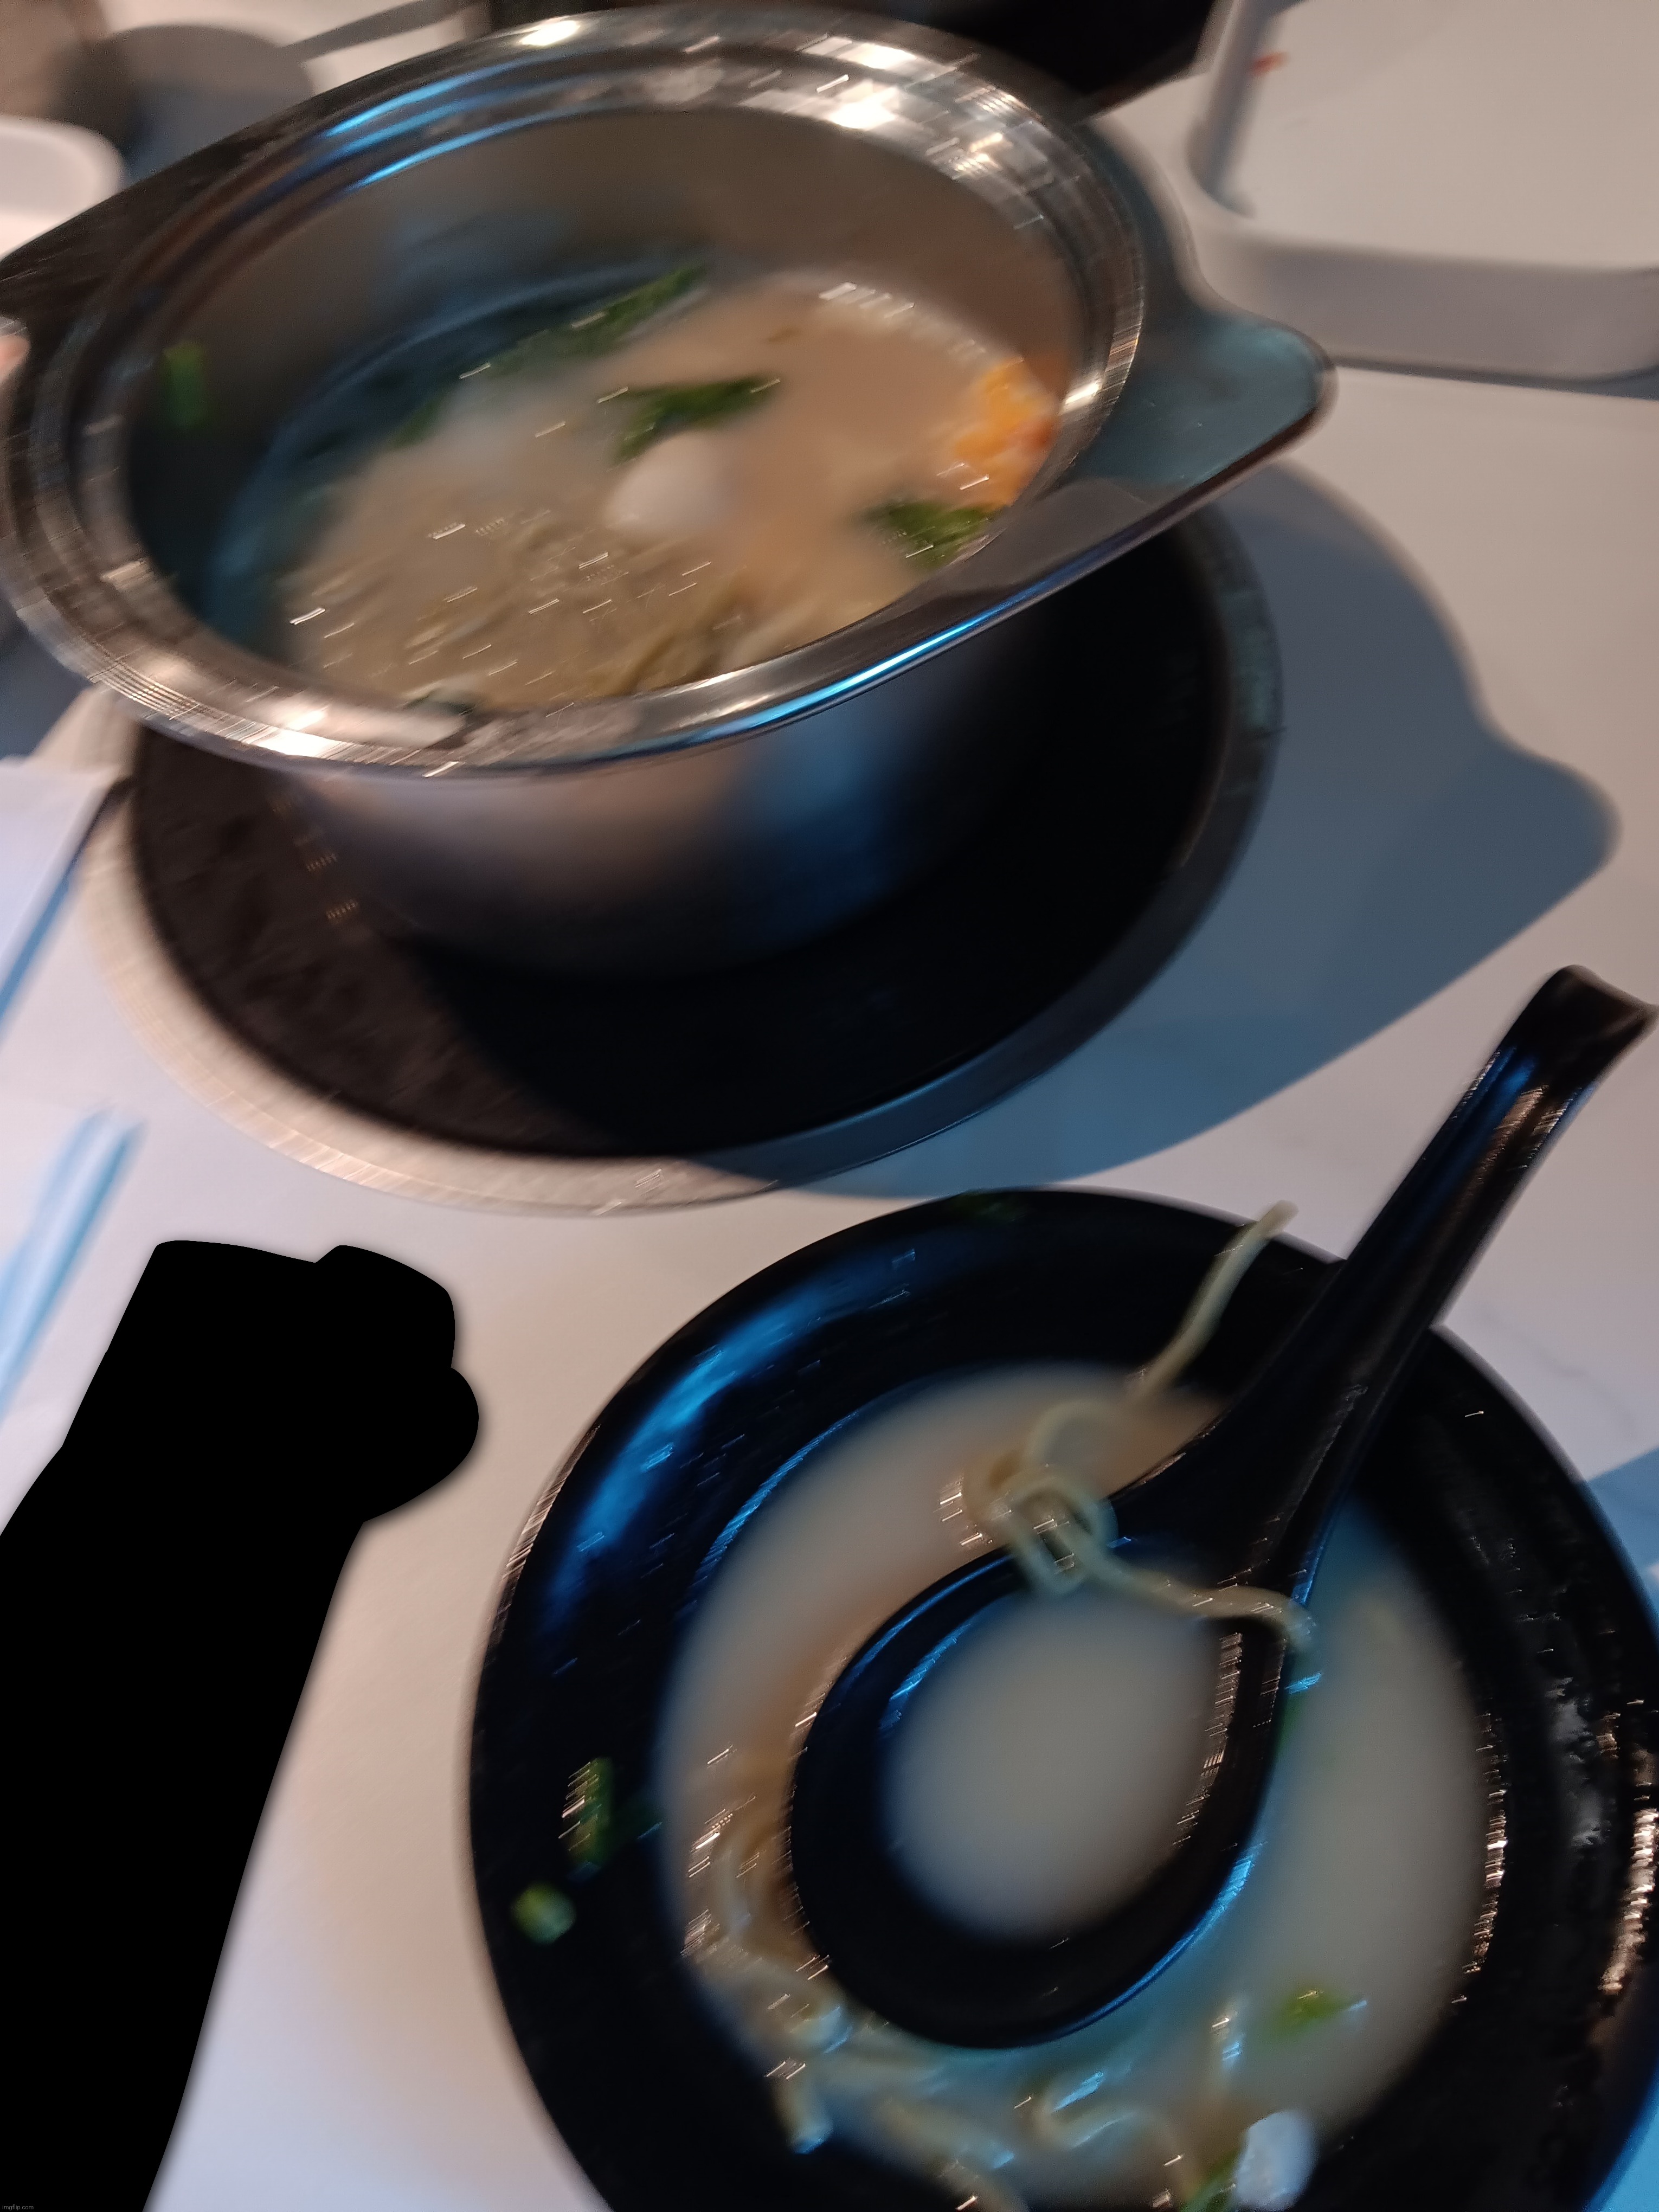 Had some yummy soup | made w/ Imgflip meme maker